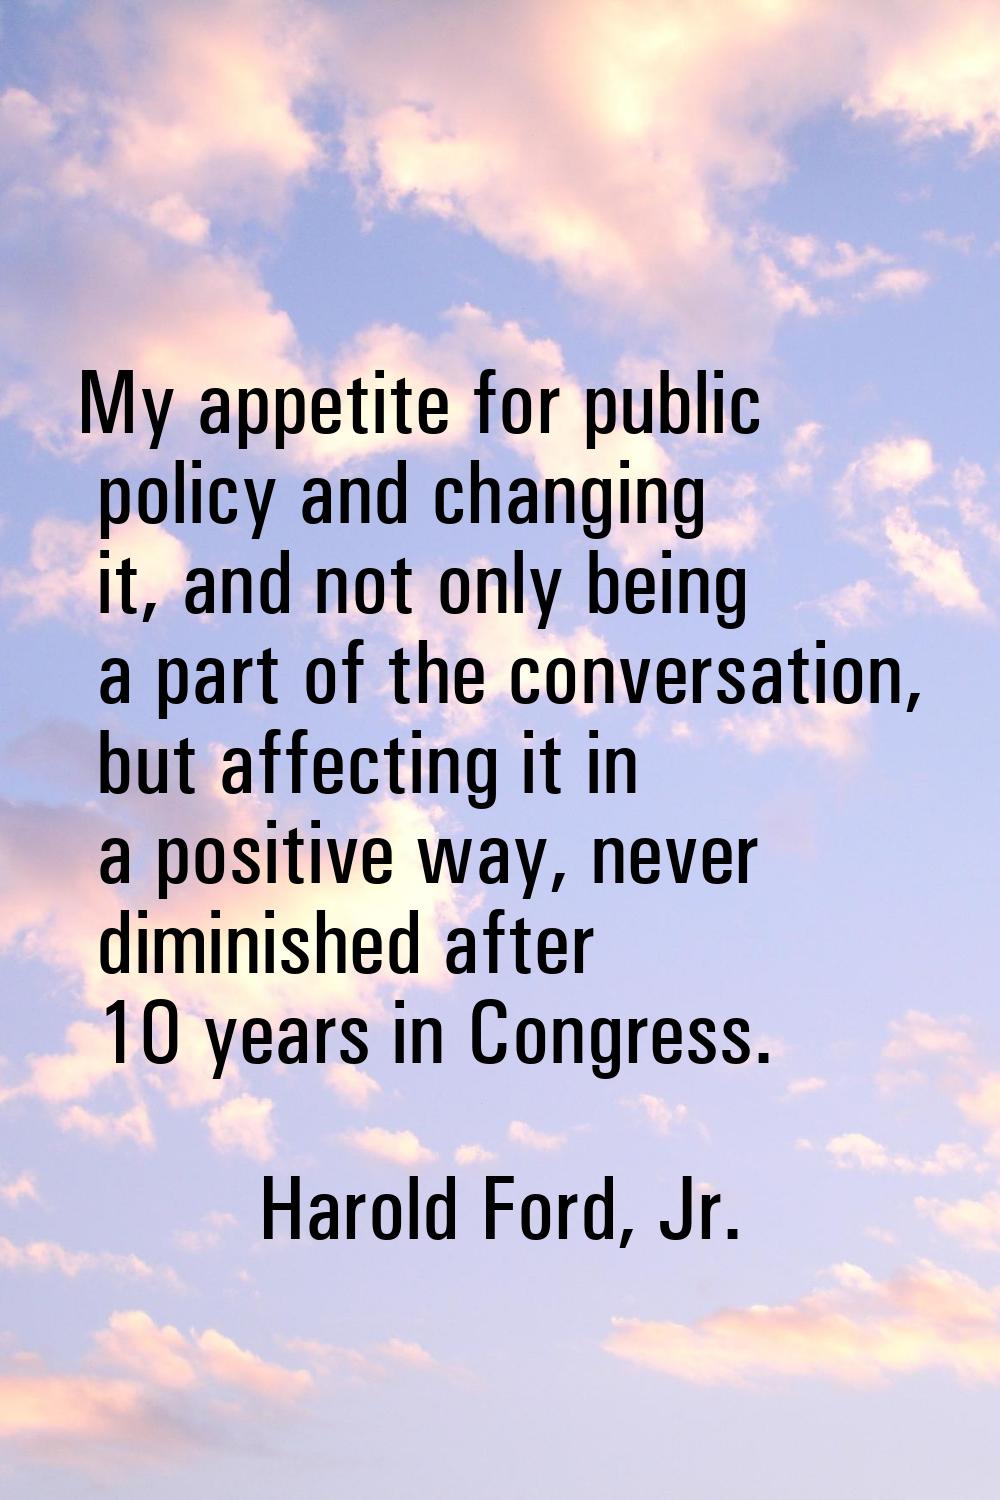 My appetite for public policy and changing it, and not only being a part of the conversation, but a